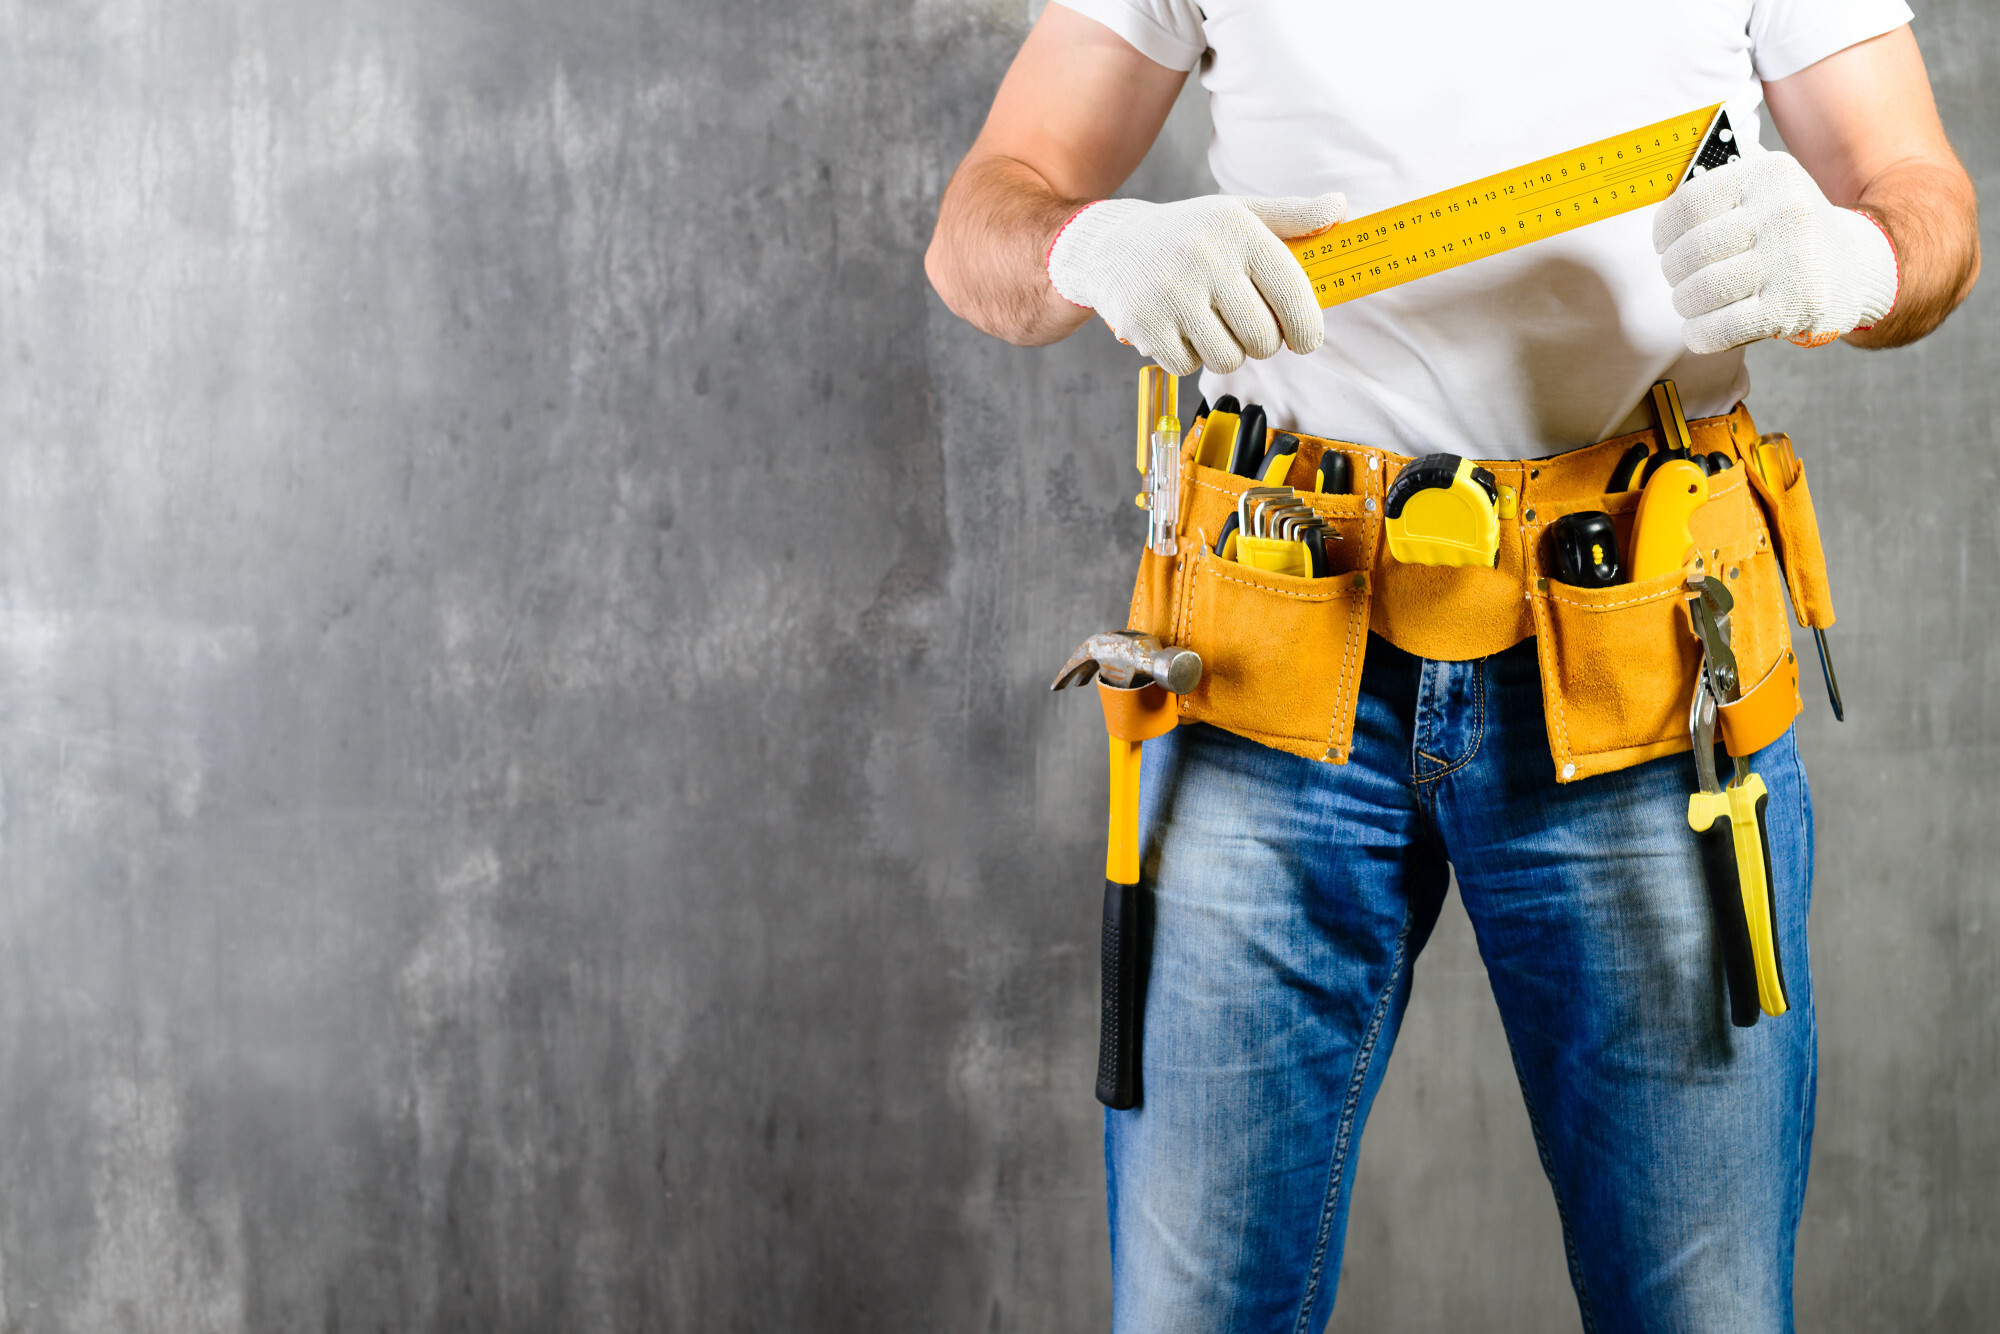 The Importance of Professional Handyman Services in Selling Your Home